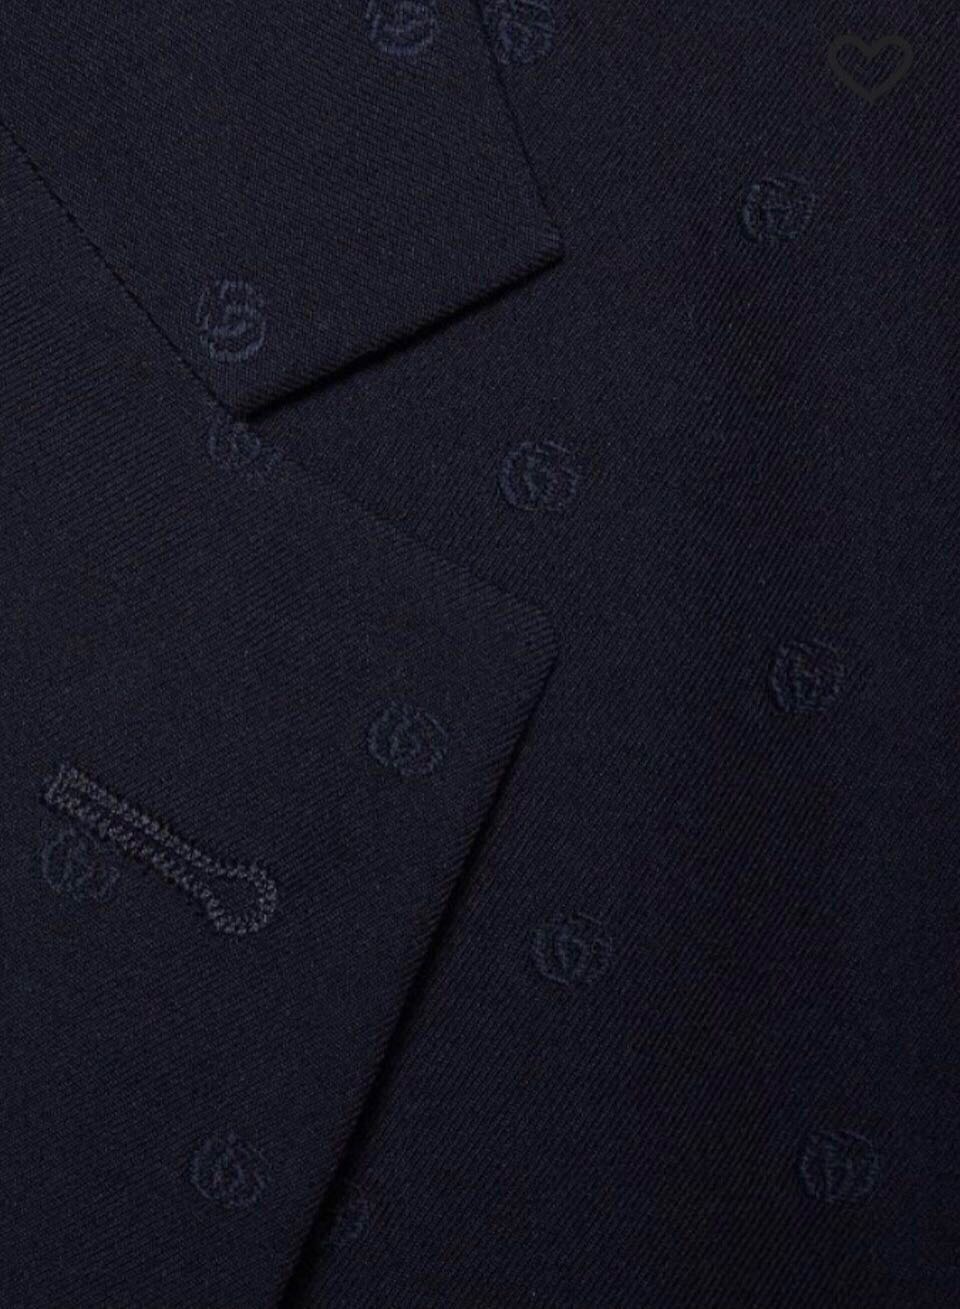 Gucci Double G Blue Single Breasted Suit - 5